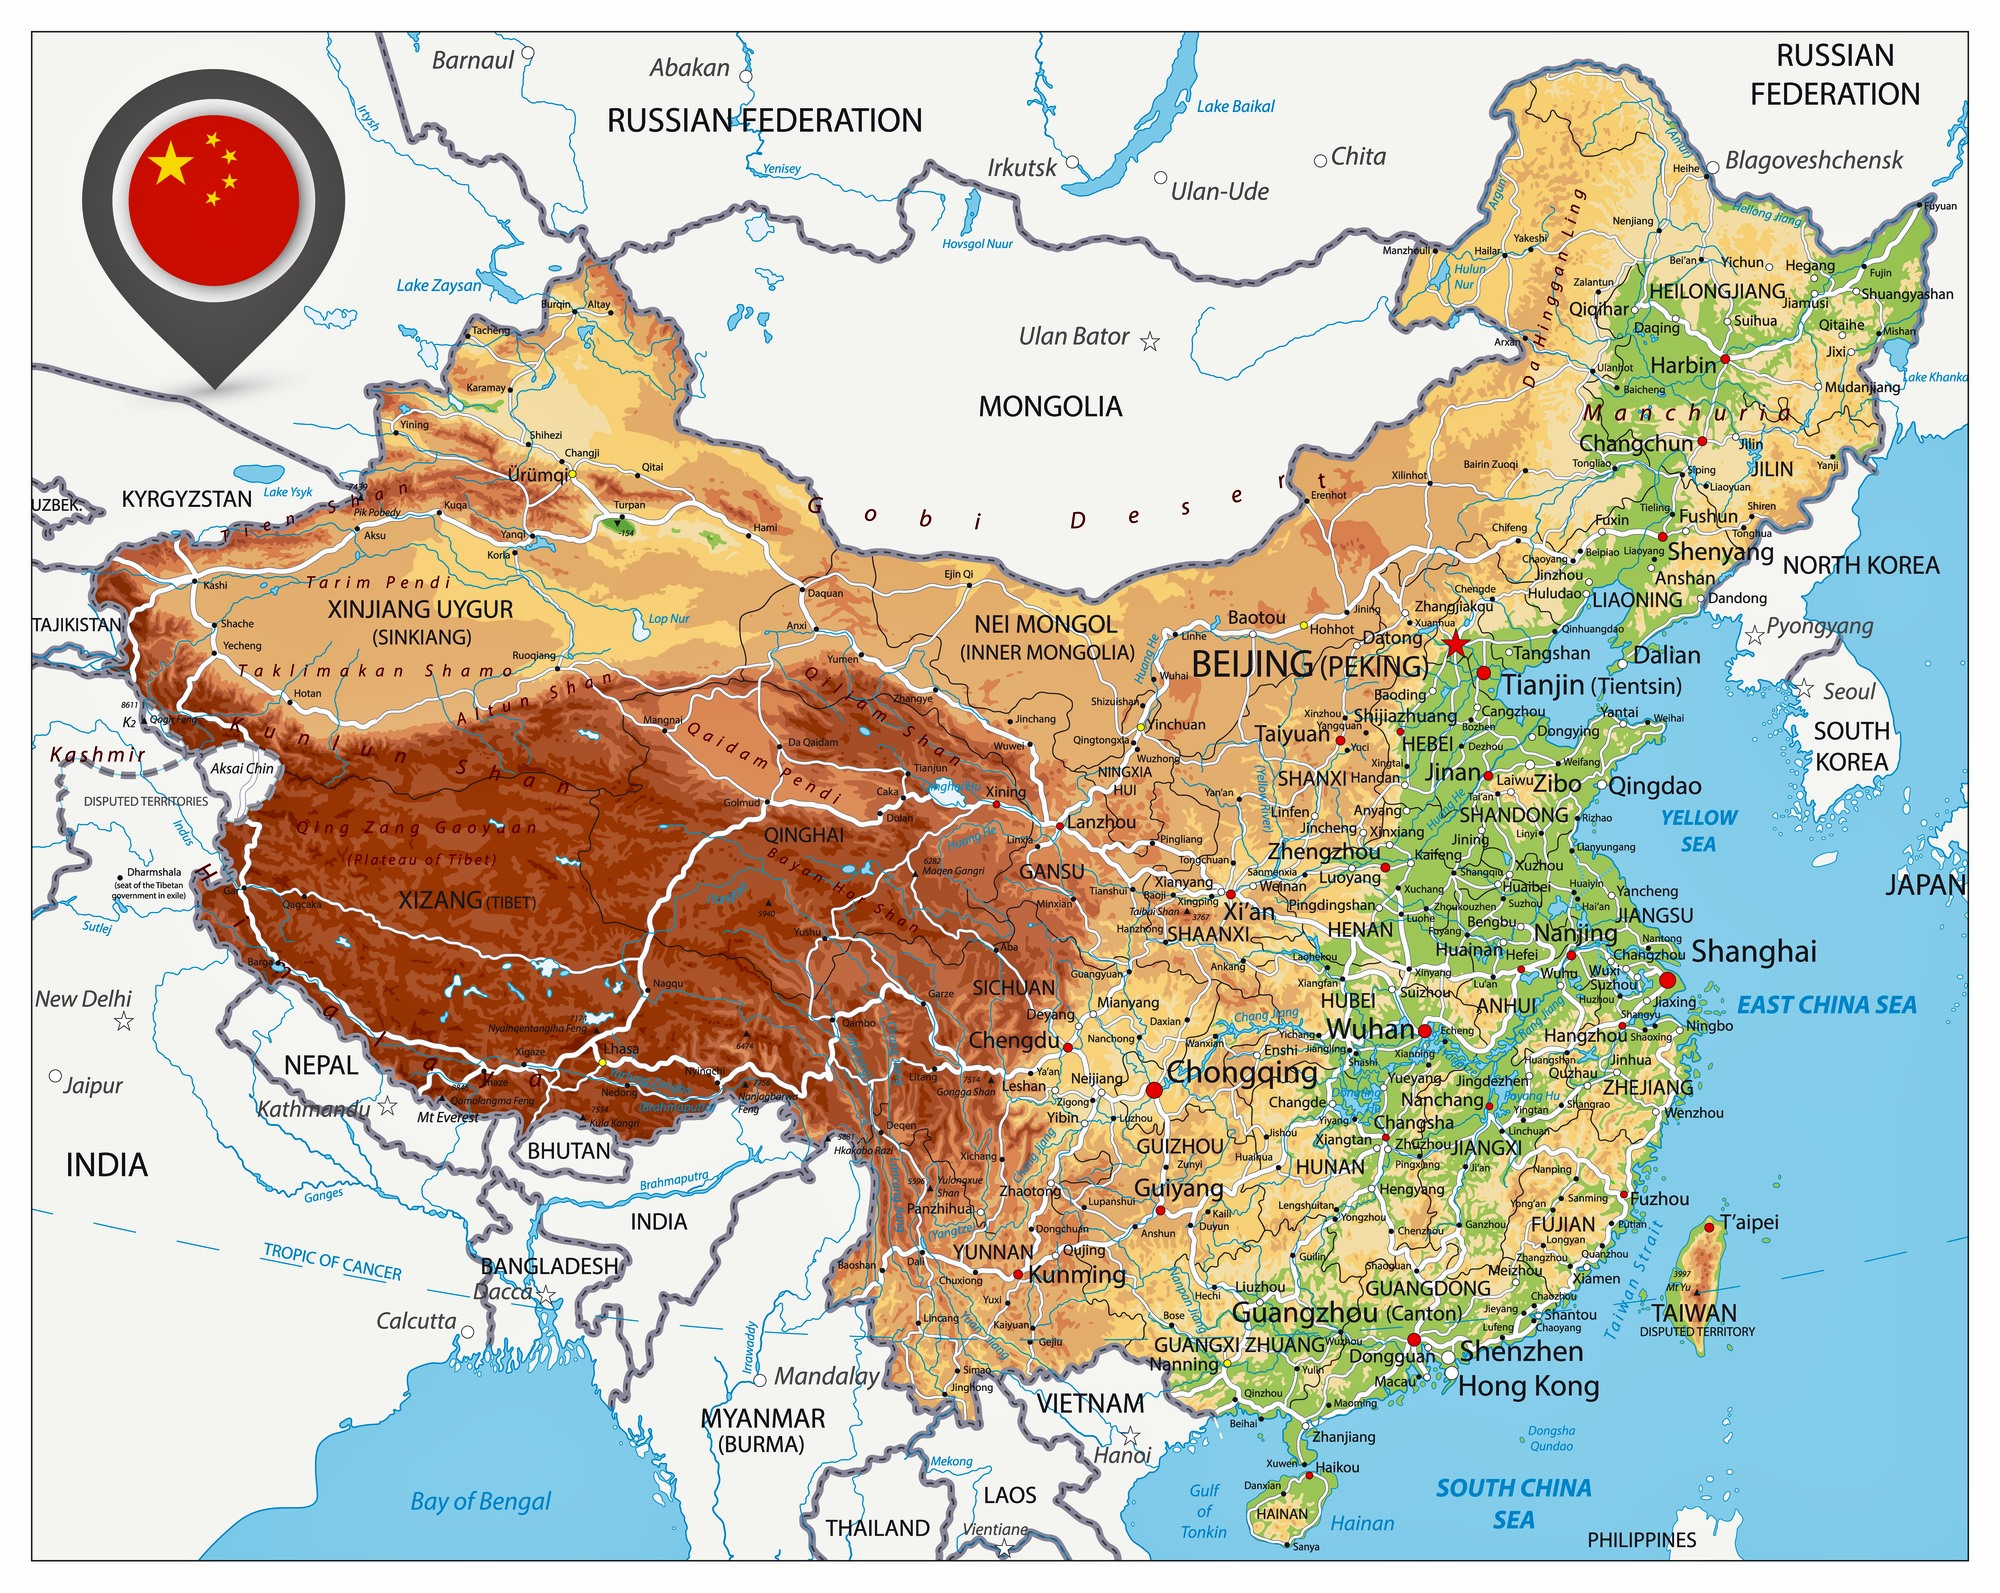 China Physical Map of Relief - OrangeSmile.com